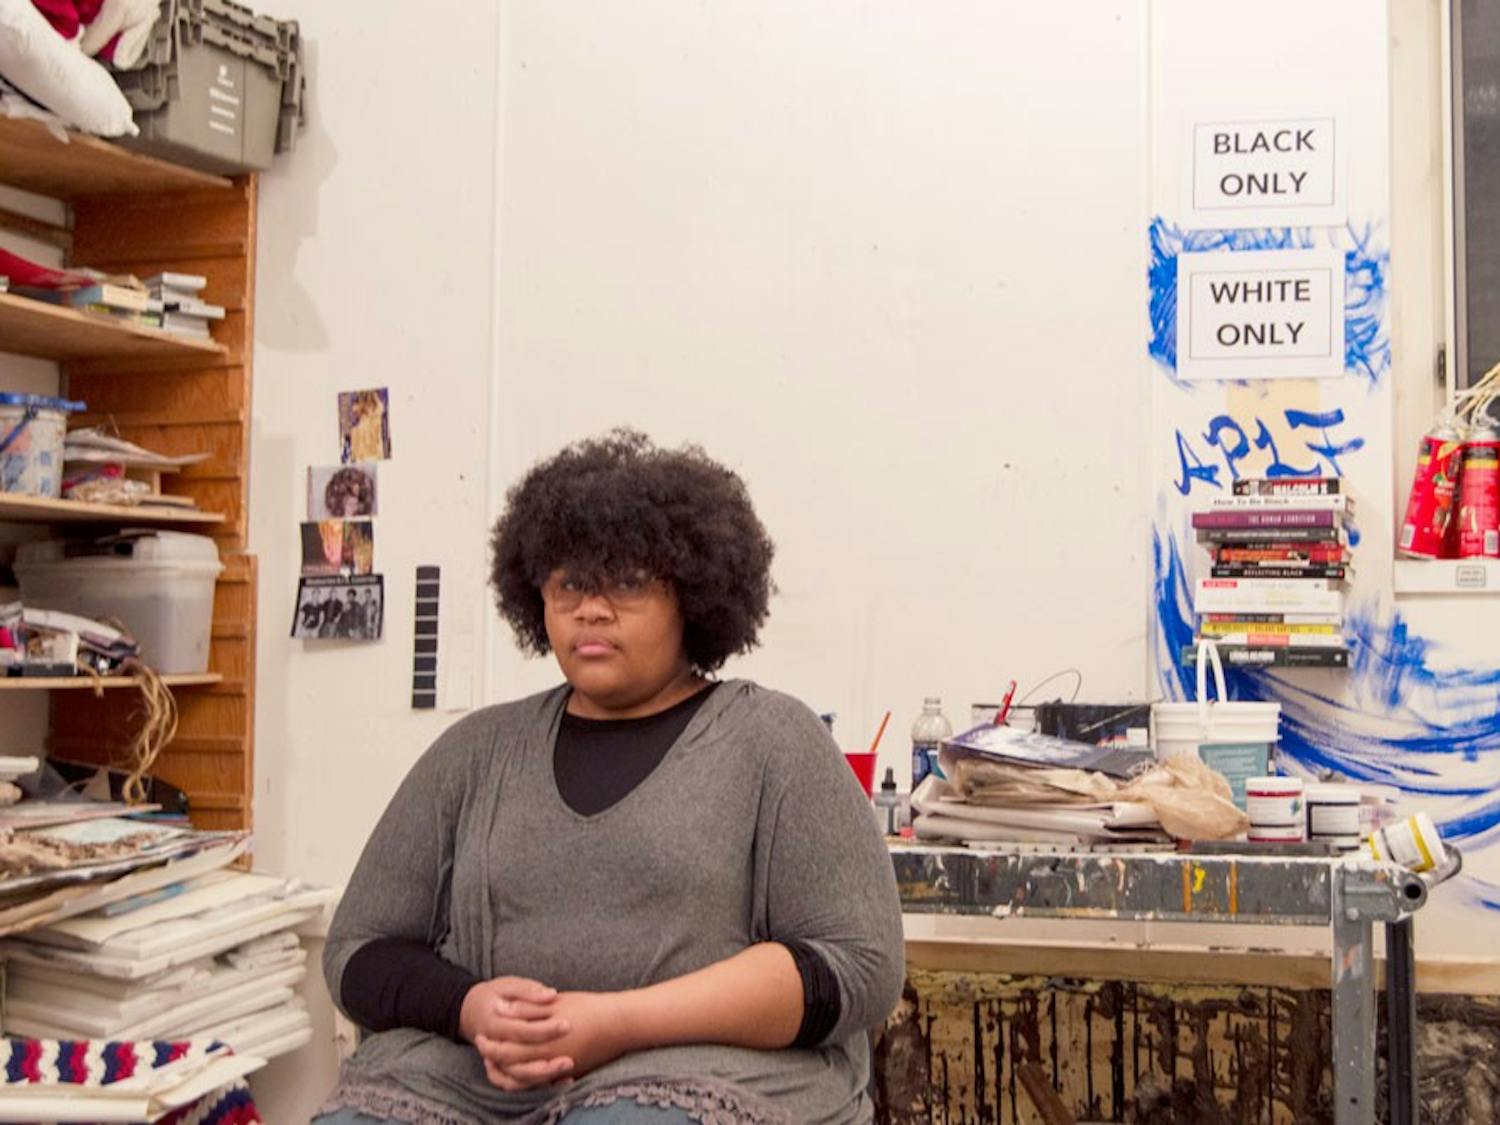 Ashley Powell, who has received both criticism and support for her “White Only, Black Only” art project, sits in her art studio in the Center for the Arts.